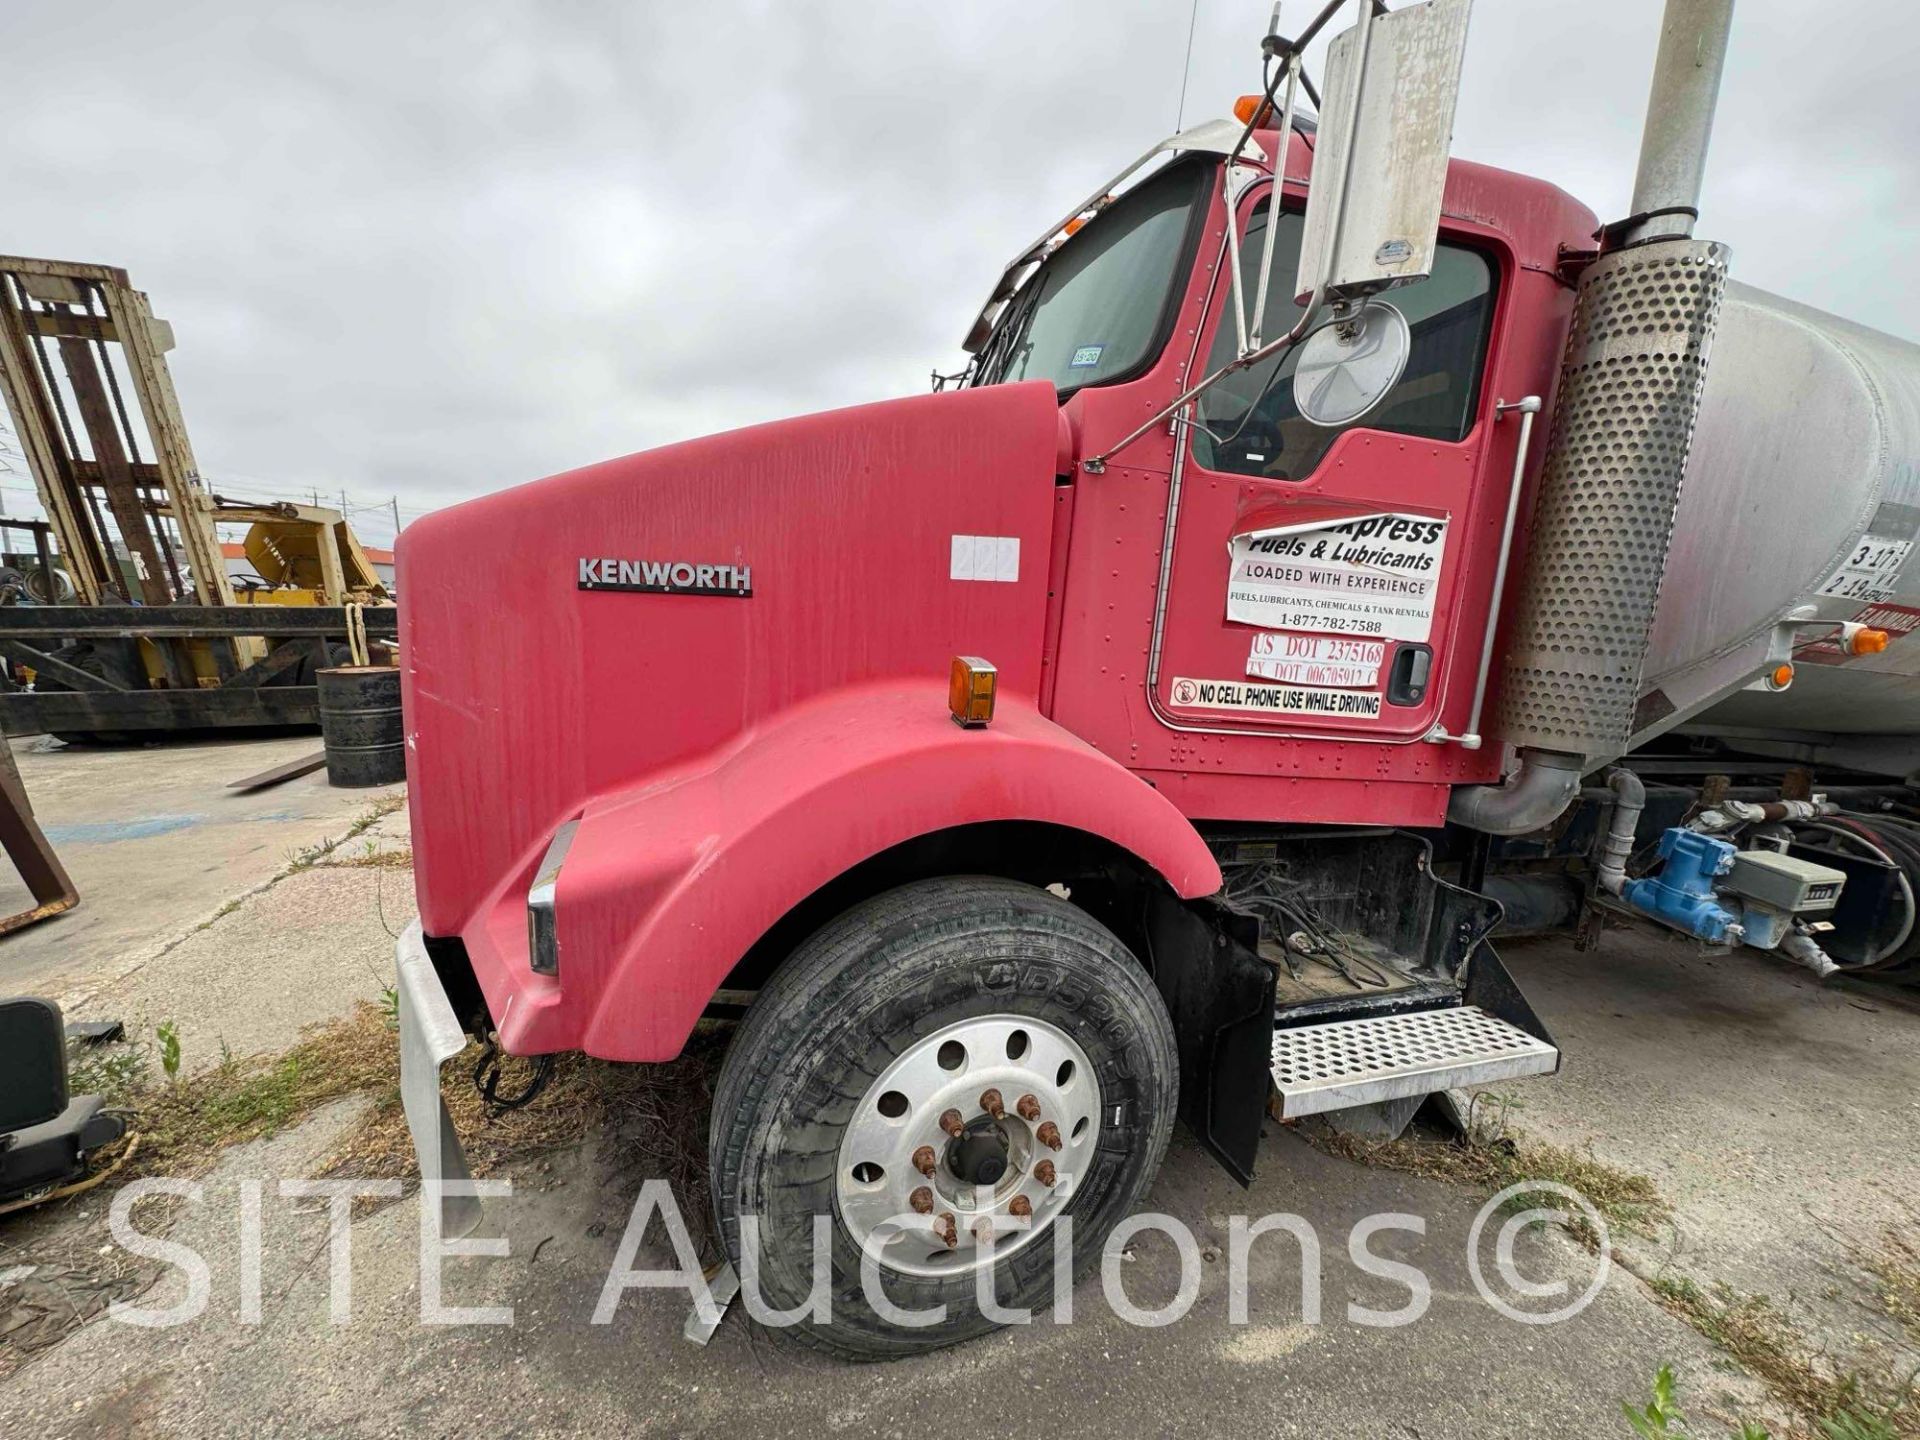 2004 Kenworth T800 T/A Fuel Truck - Image 7 of 7